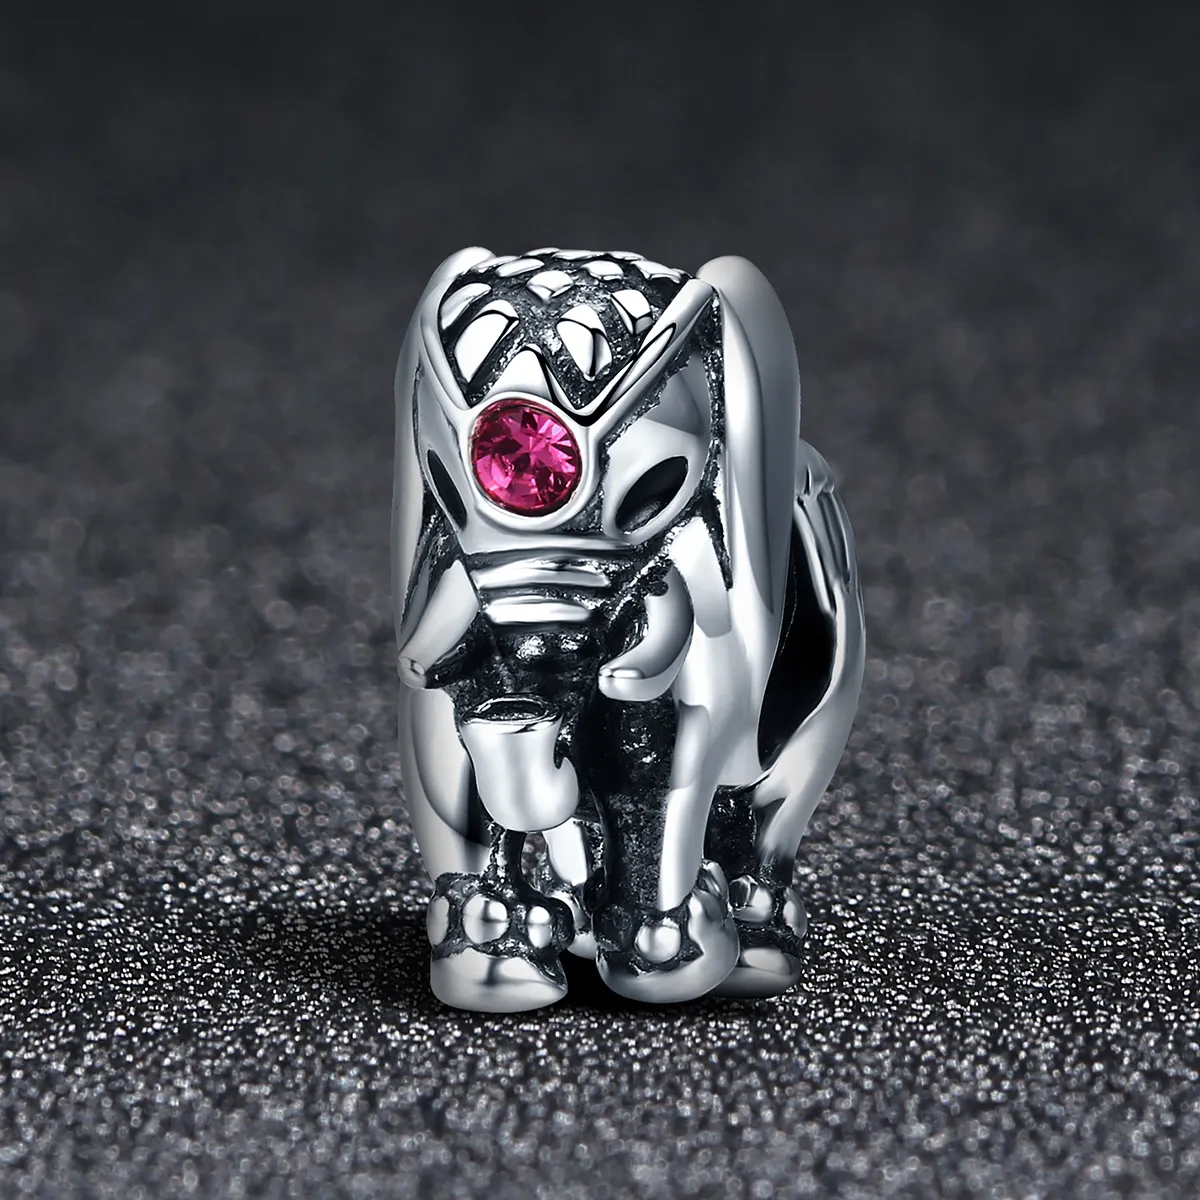 Pandora Style Silver Cute Baby Elephant Spacer Charm - SCC321